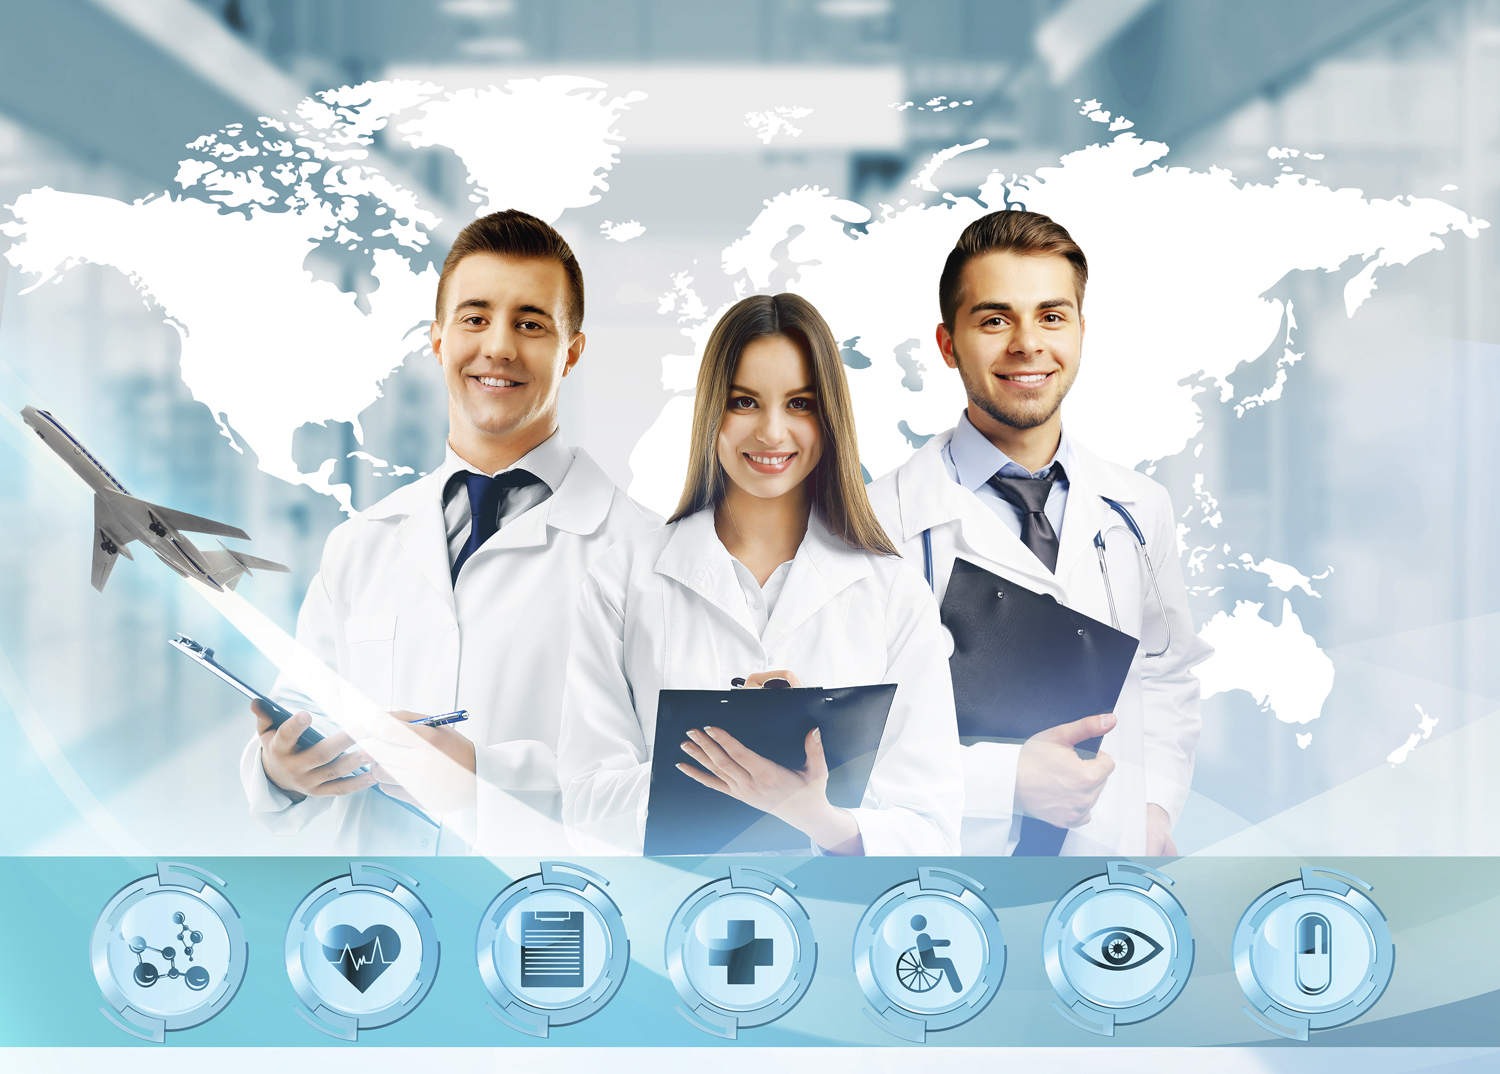 Concept of Medical Tourism